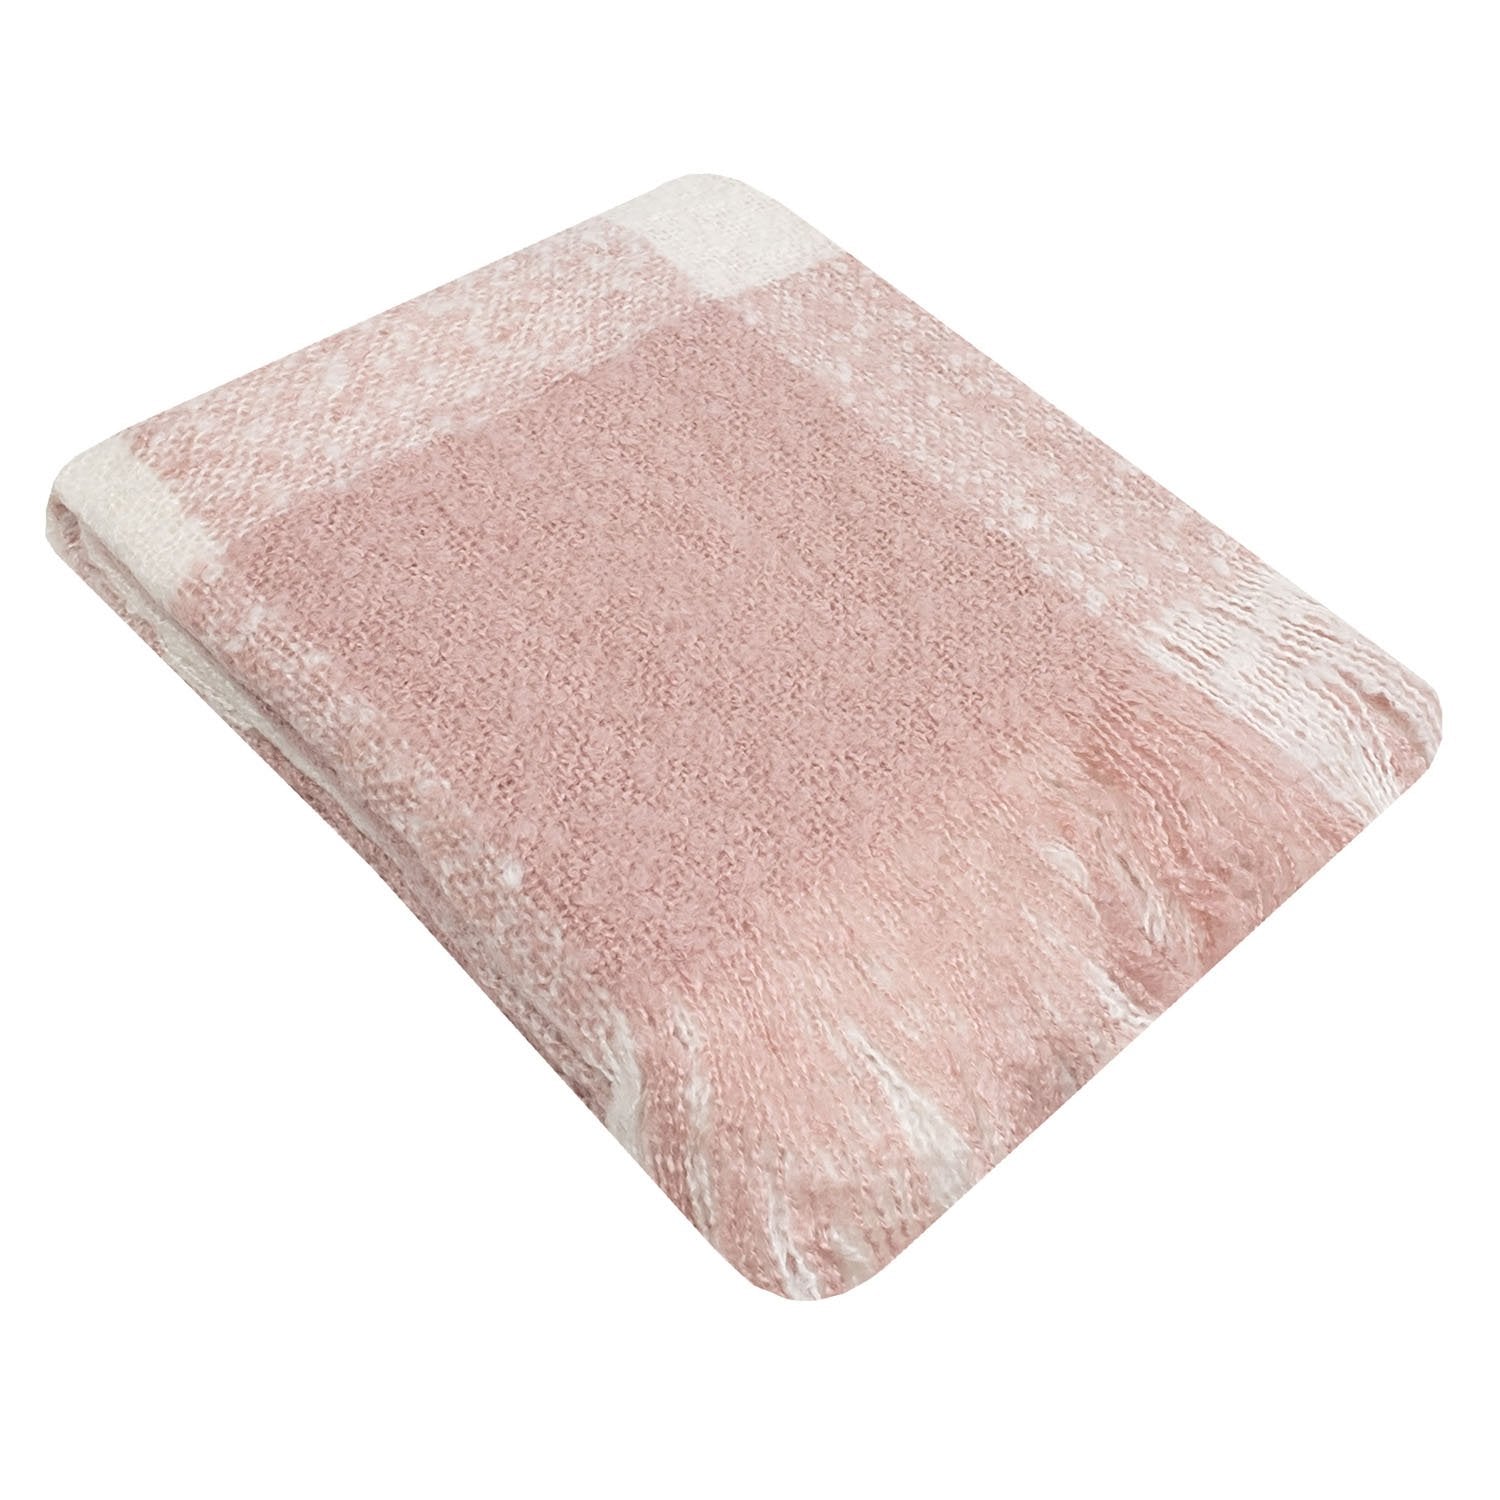 Chandler Buffalo Check Throw Blanket Pink Ivory - Folded